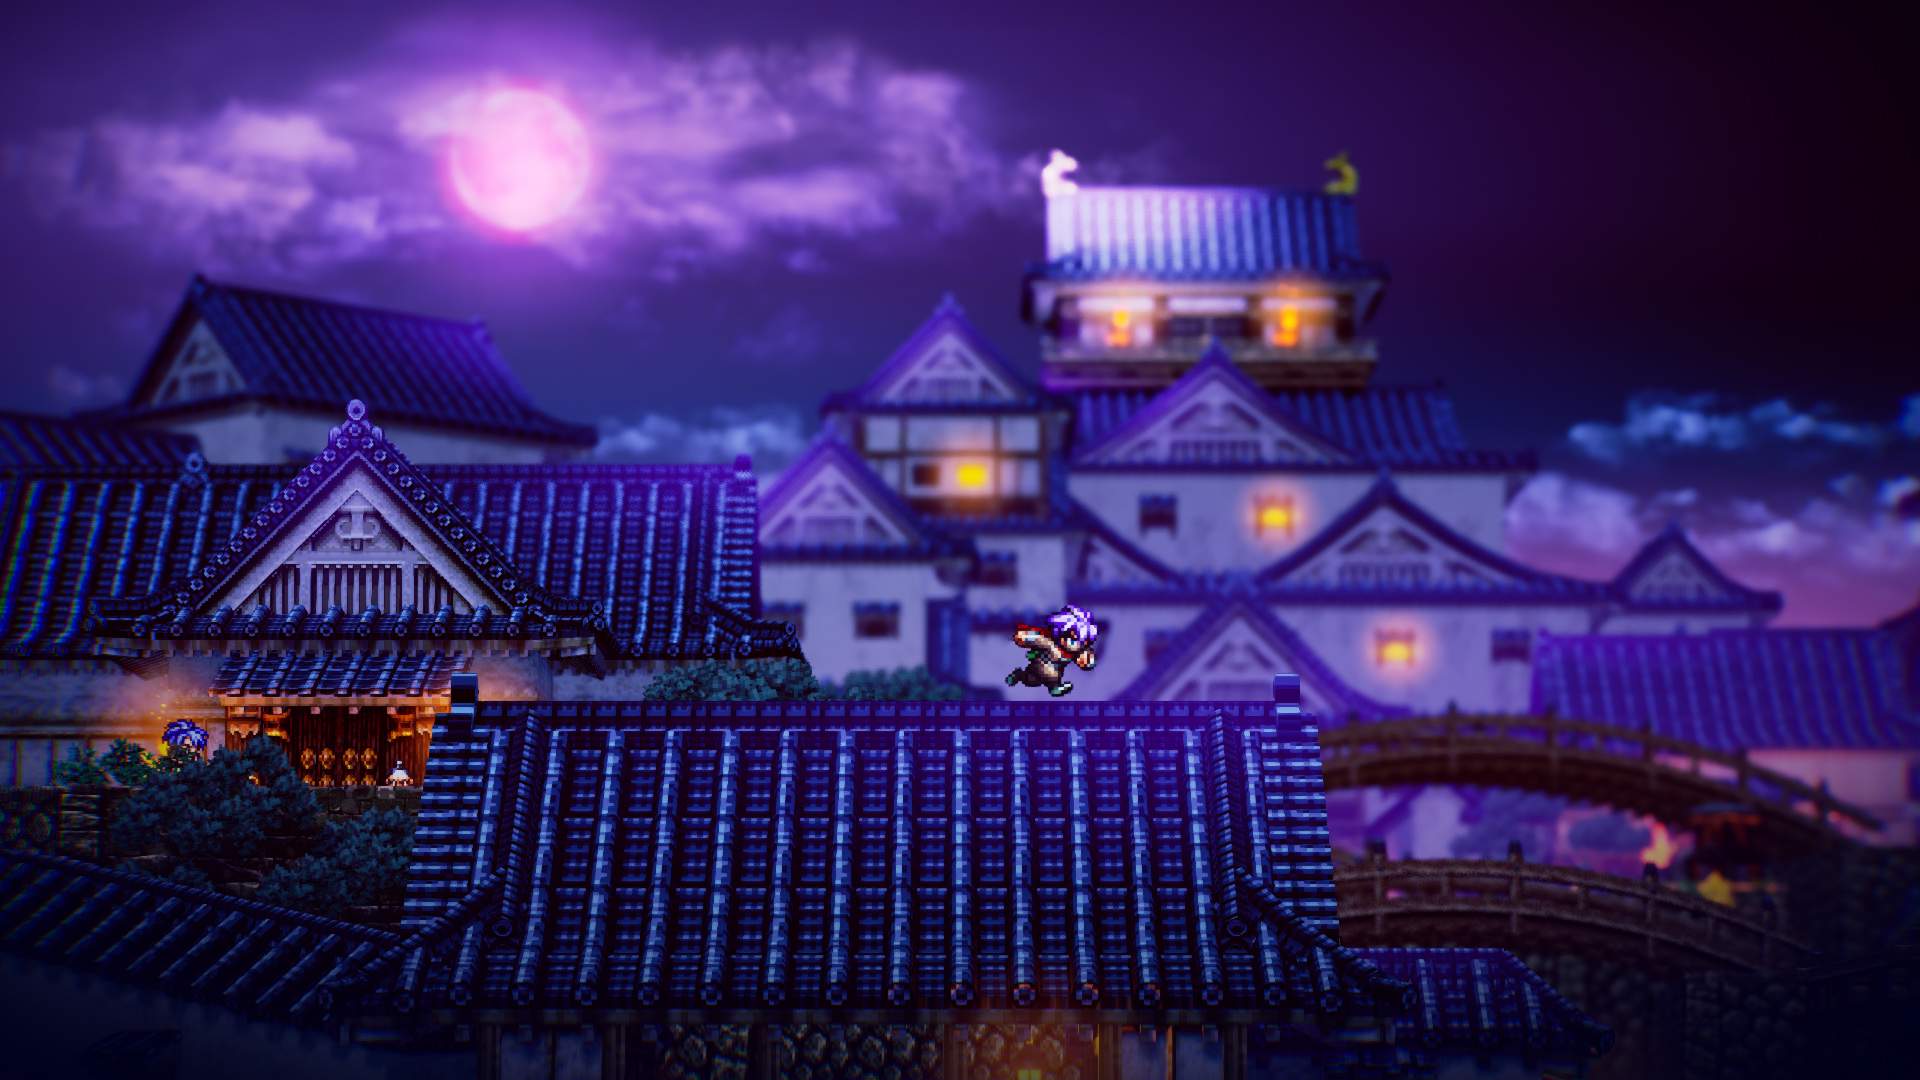 Character from Twilight of Edo Japan leaping across japanese rooftops at night.